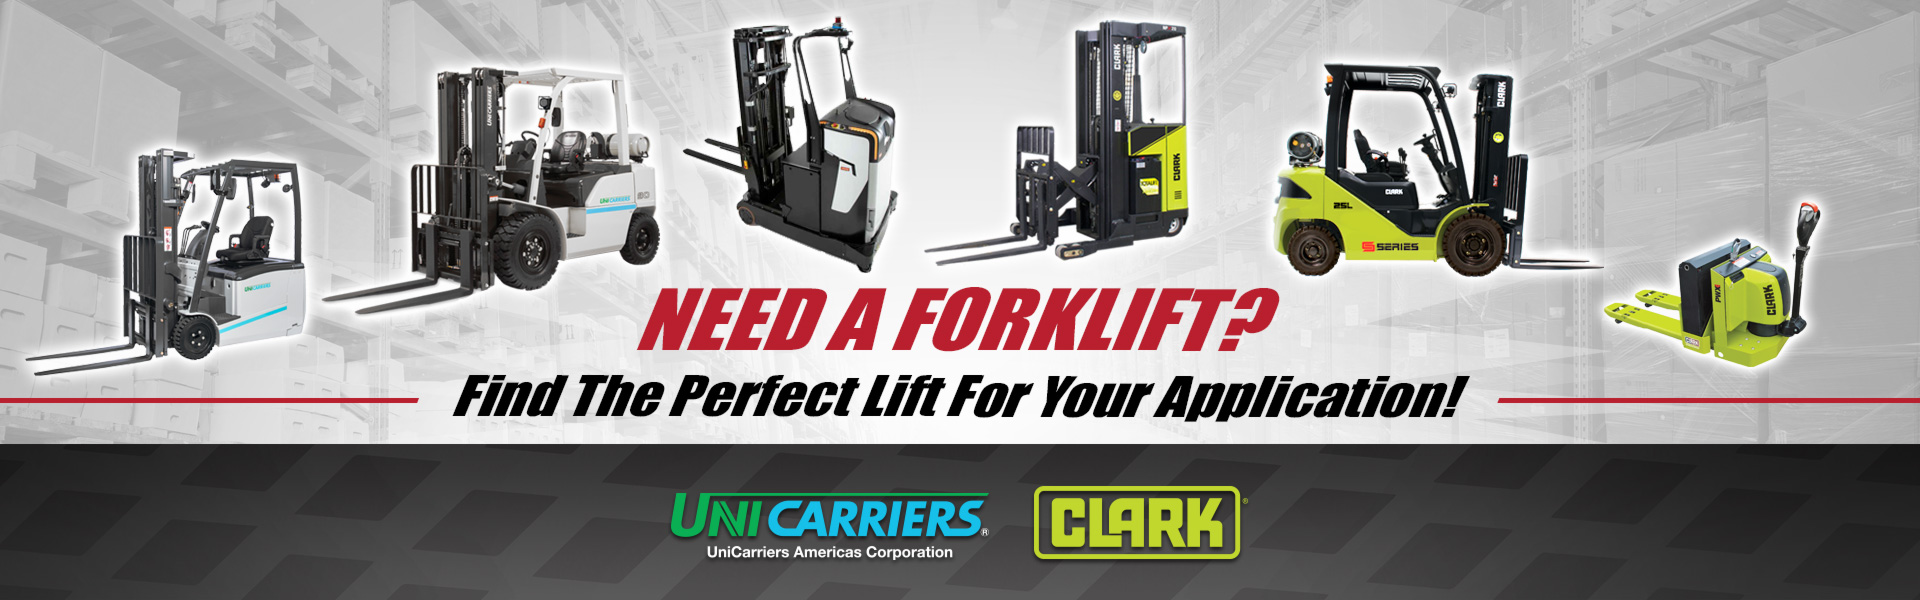 Need a forklift? Find the perfect UniCarriers or Clark forklift for your application at Mid Atlantic.